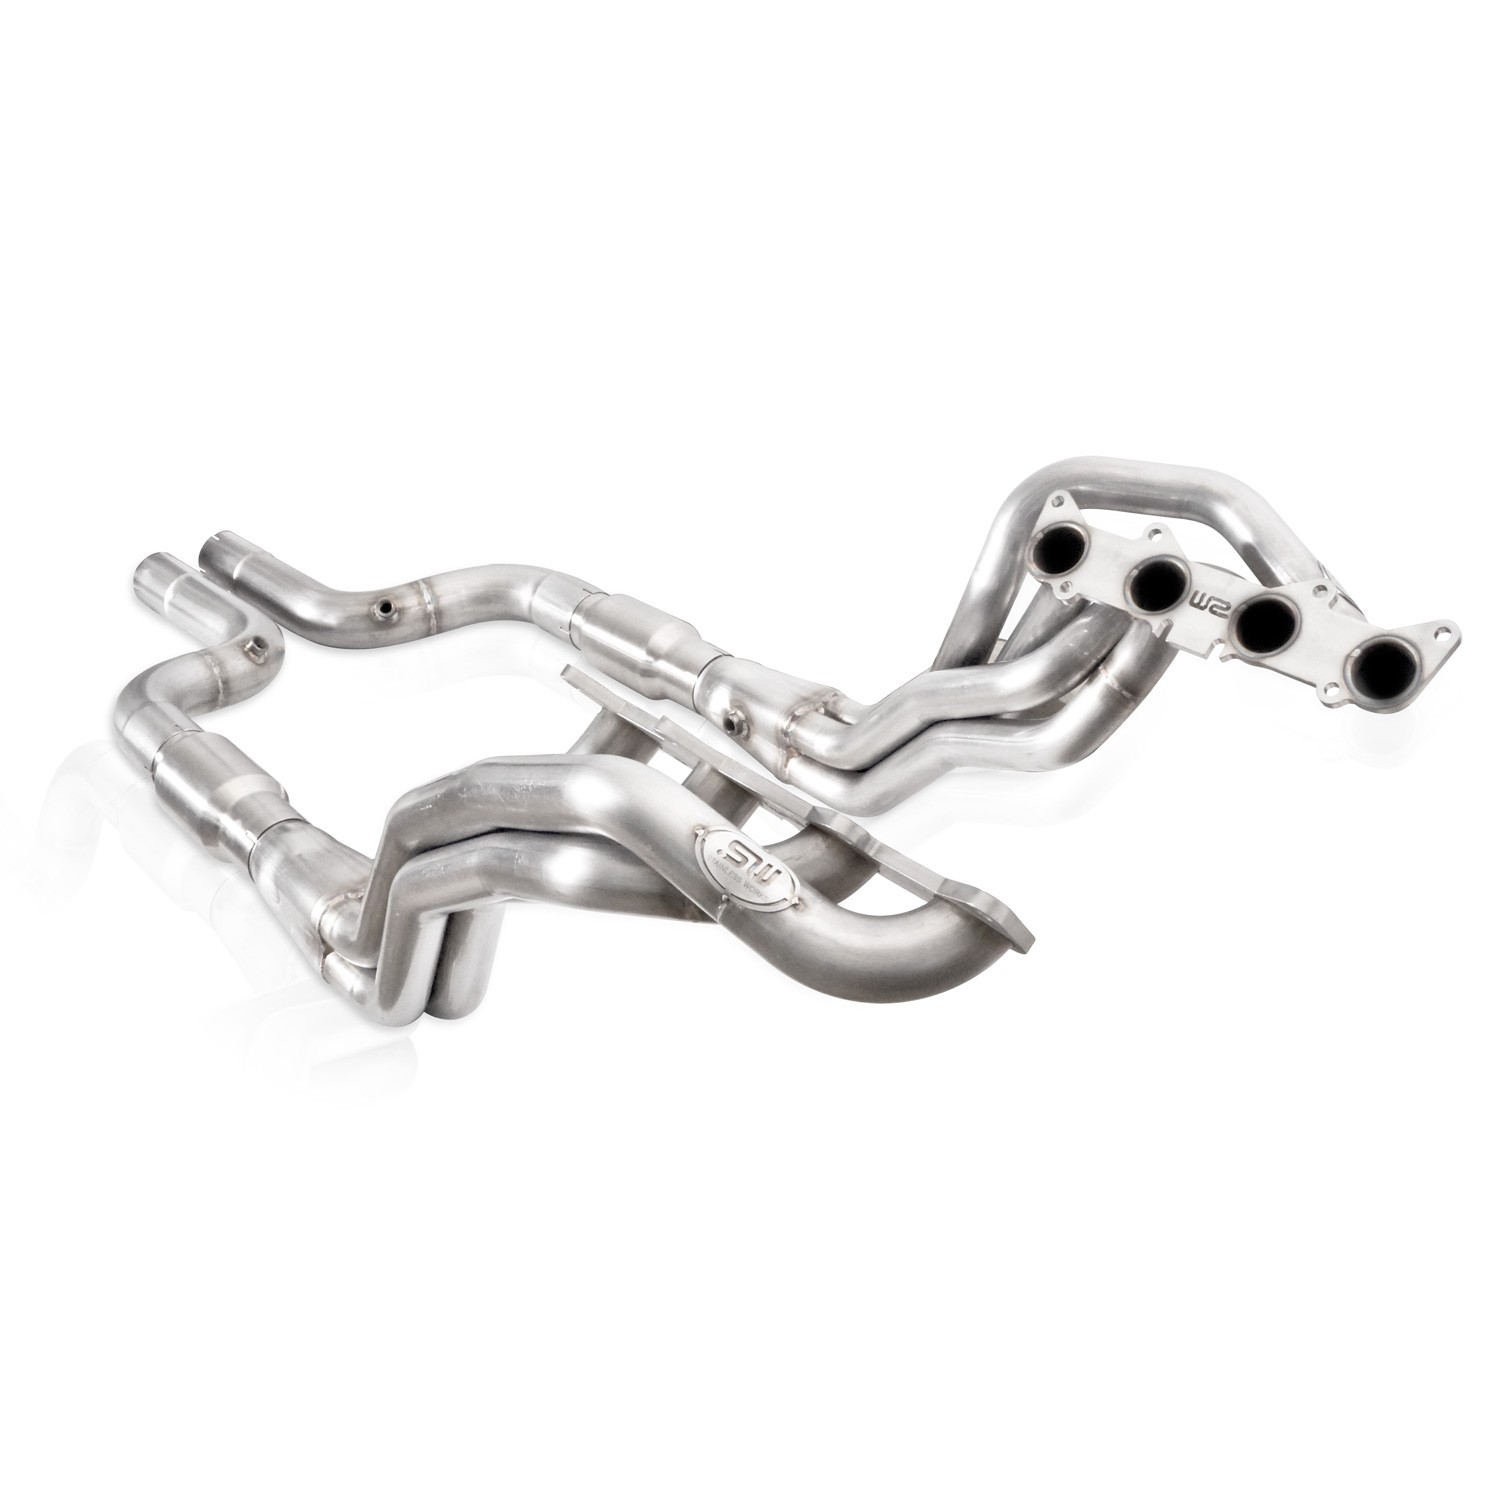 2015-2021 Mustang GT 5.0L SW Headers 1-7/8" With Catted Leads Aftermarket Connect